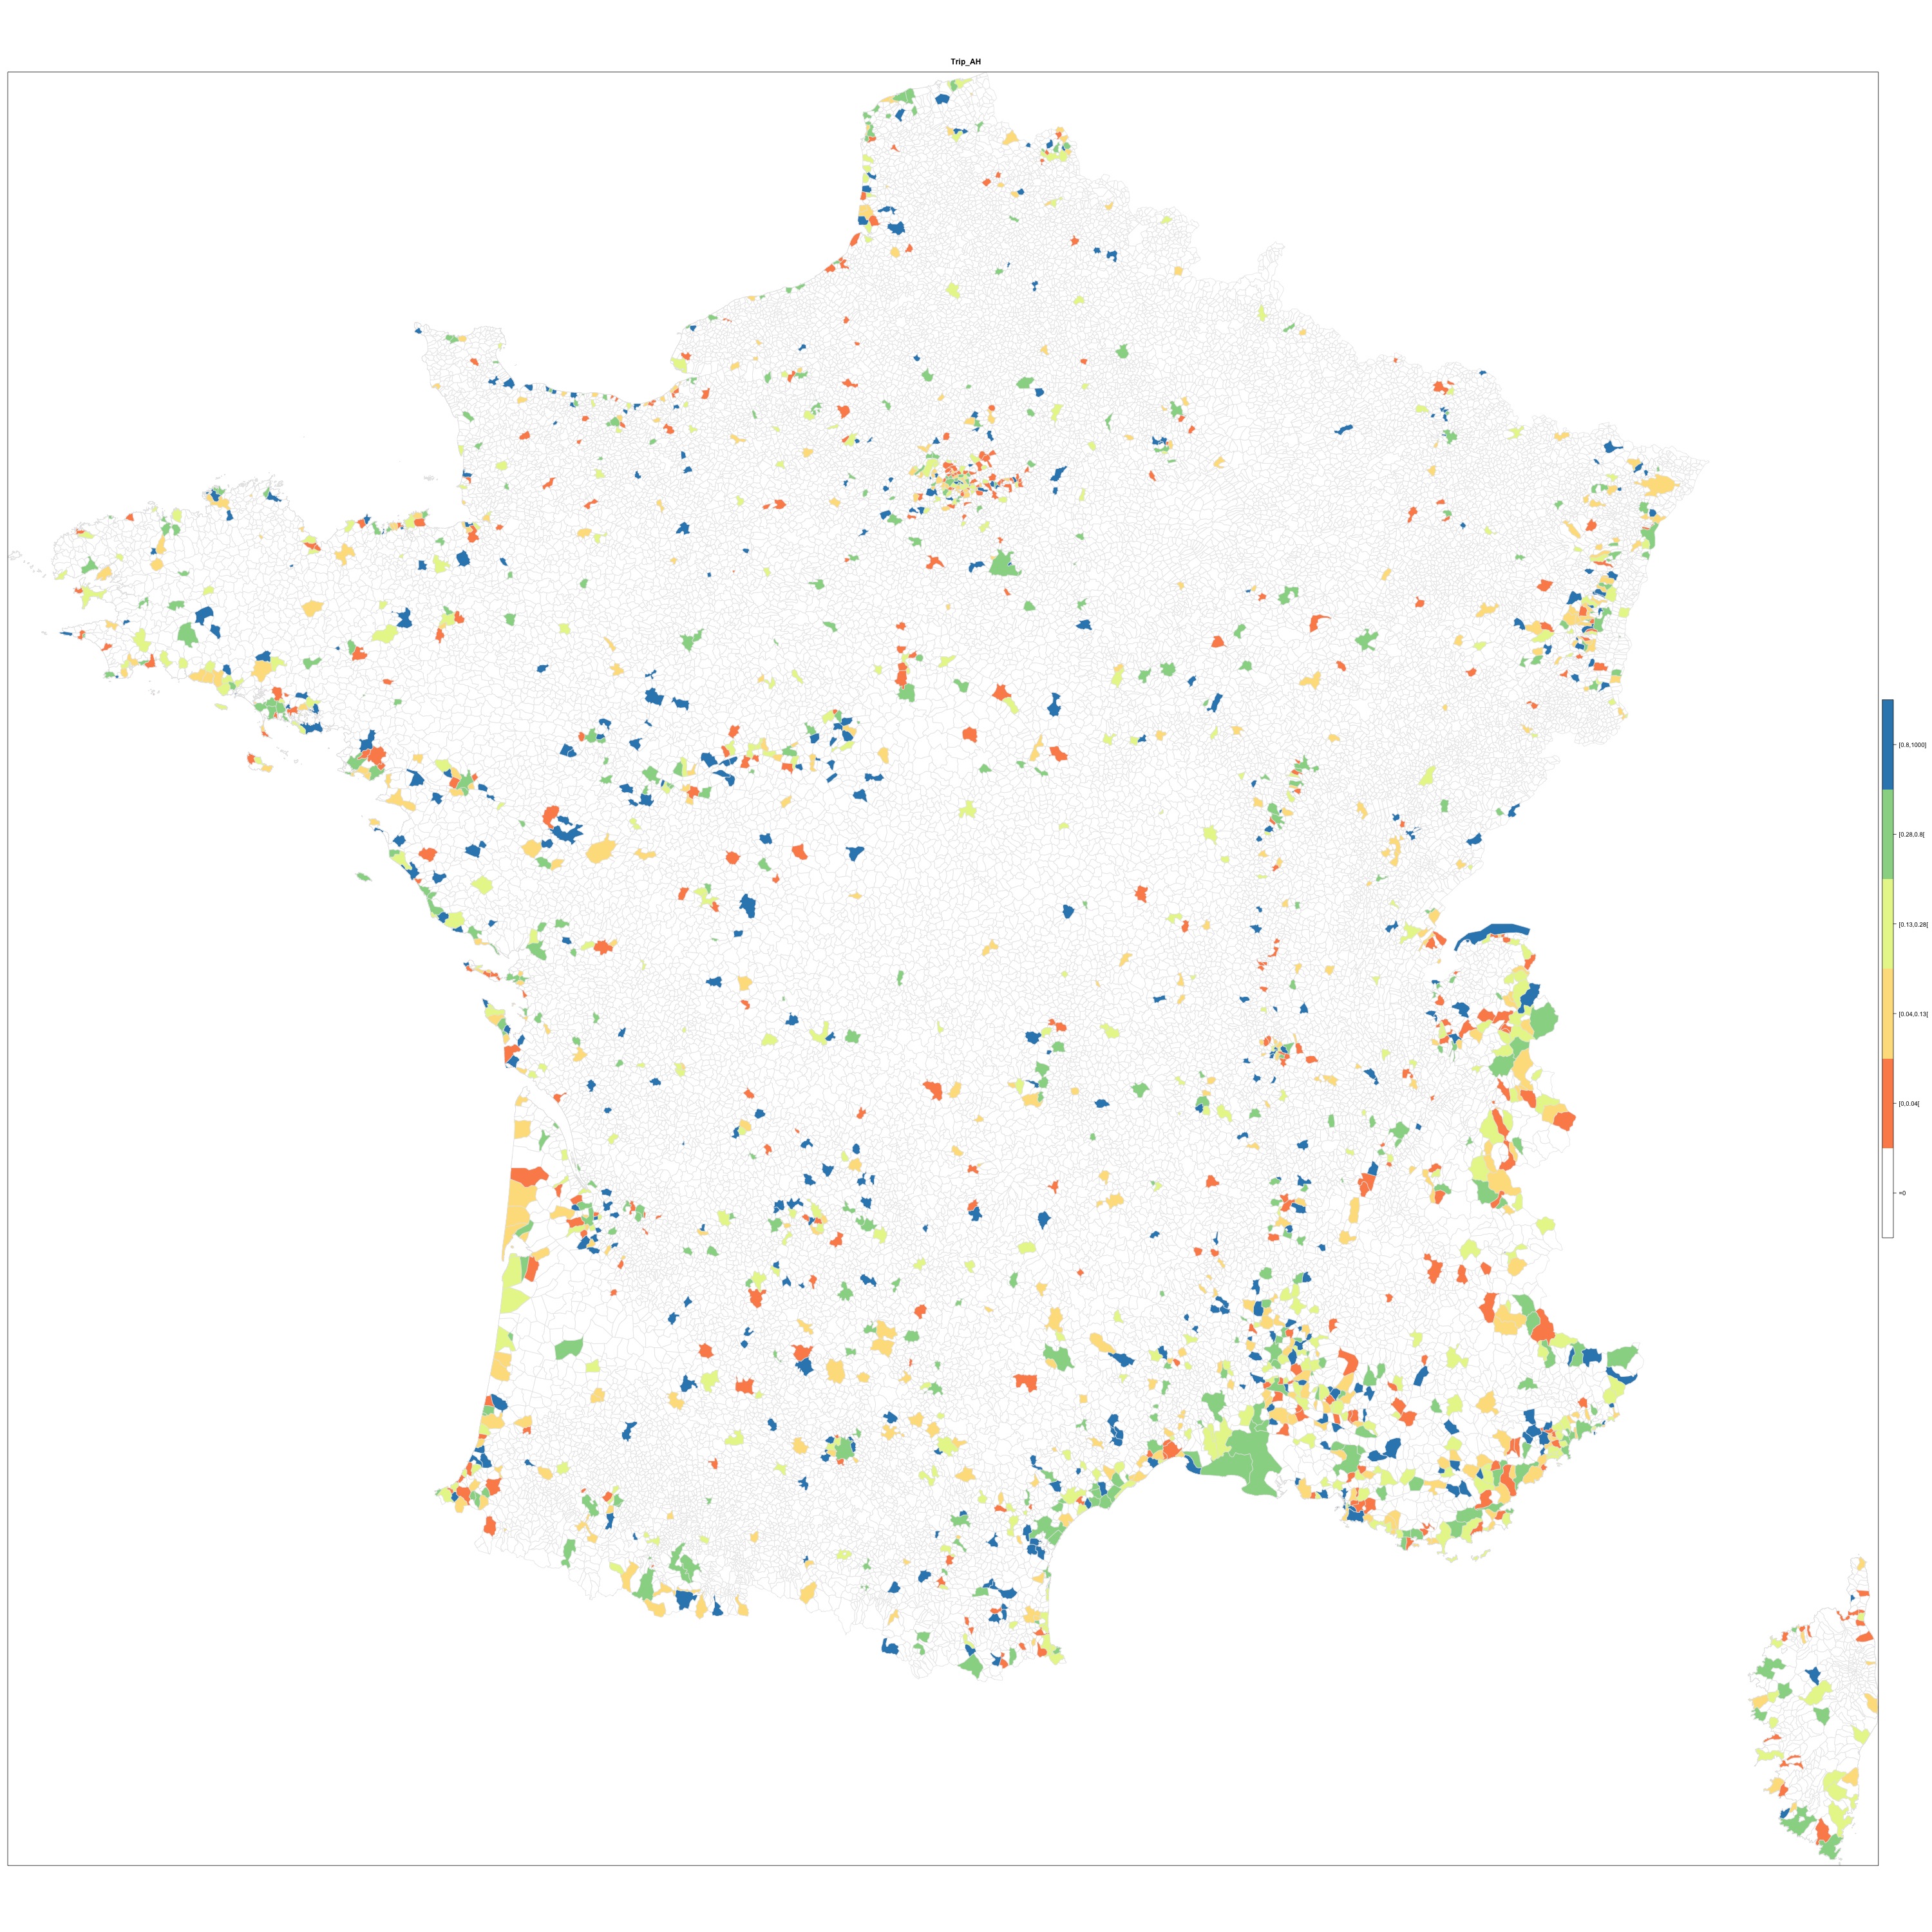 Map 5 : Relations between touristic services. A map of French communes coloured according to the ratio between the number of reviews of attractions/the number of reviews of hotels. Communes with less than 10 reviews on hotels and 10 reviews on attractions are not represented. Source : Gaël Chareyron, Saskia Cousin, Jérôme Da Rugna and Sébastien Jacquot, 2014.